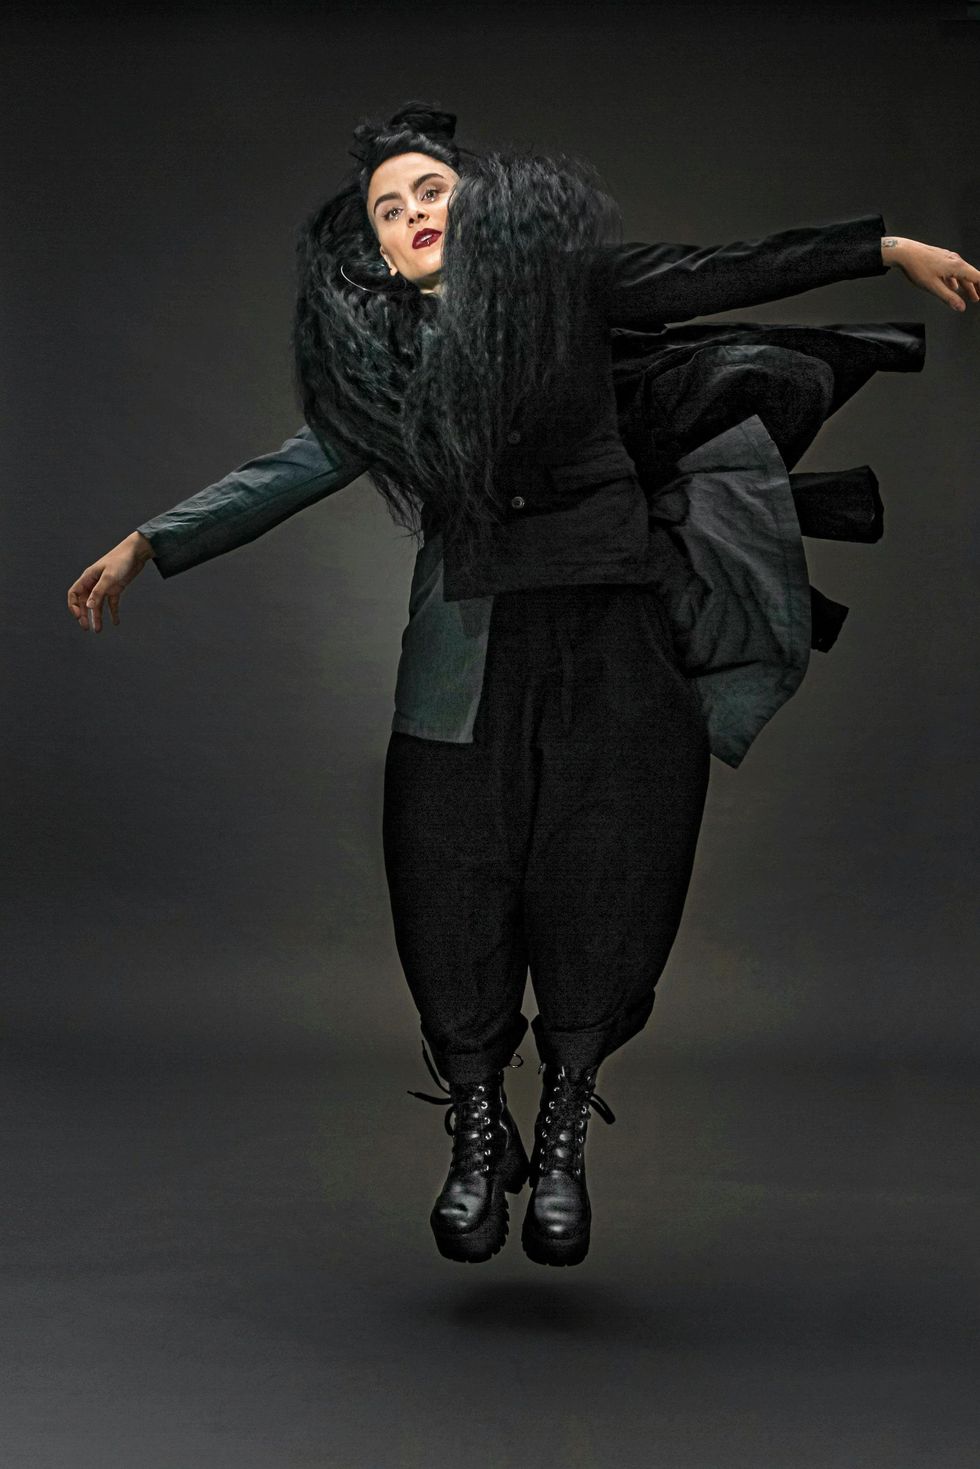 Sonya Tayeh jumps just off the floor, feet together, wearing layers of black and grey which float up around her, following the lines of her arms also floating out to the sides